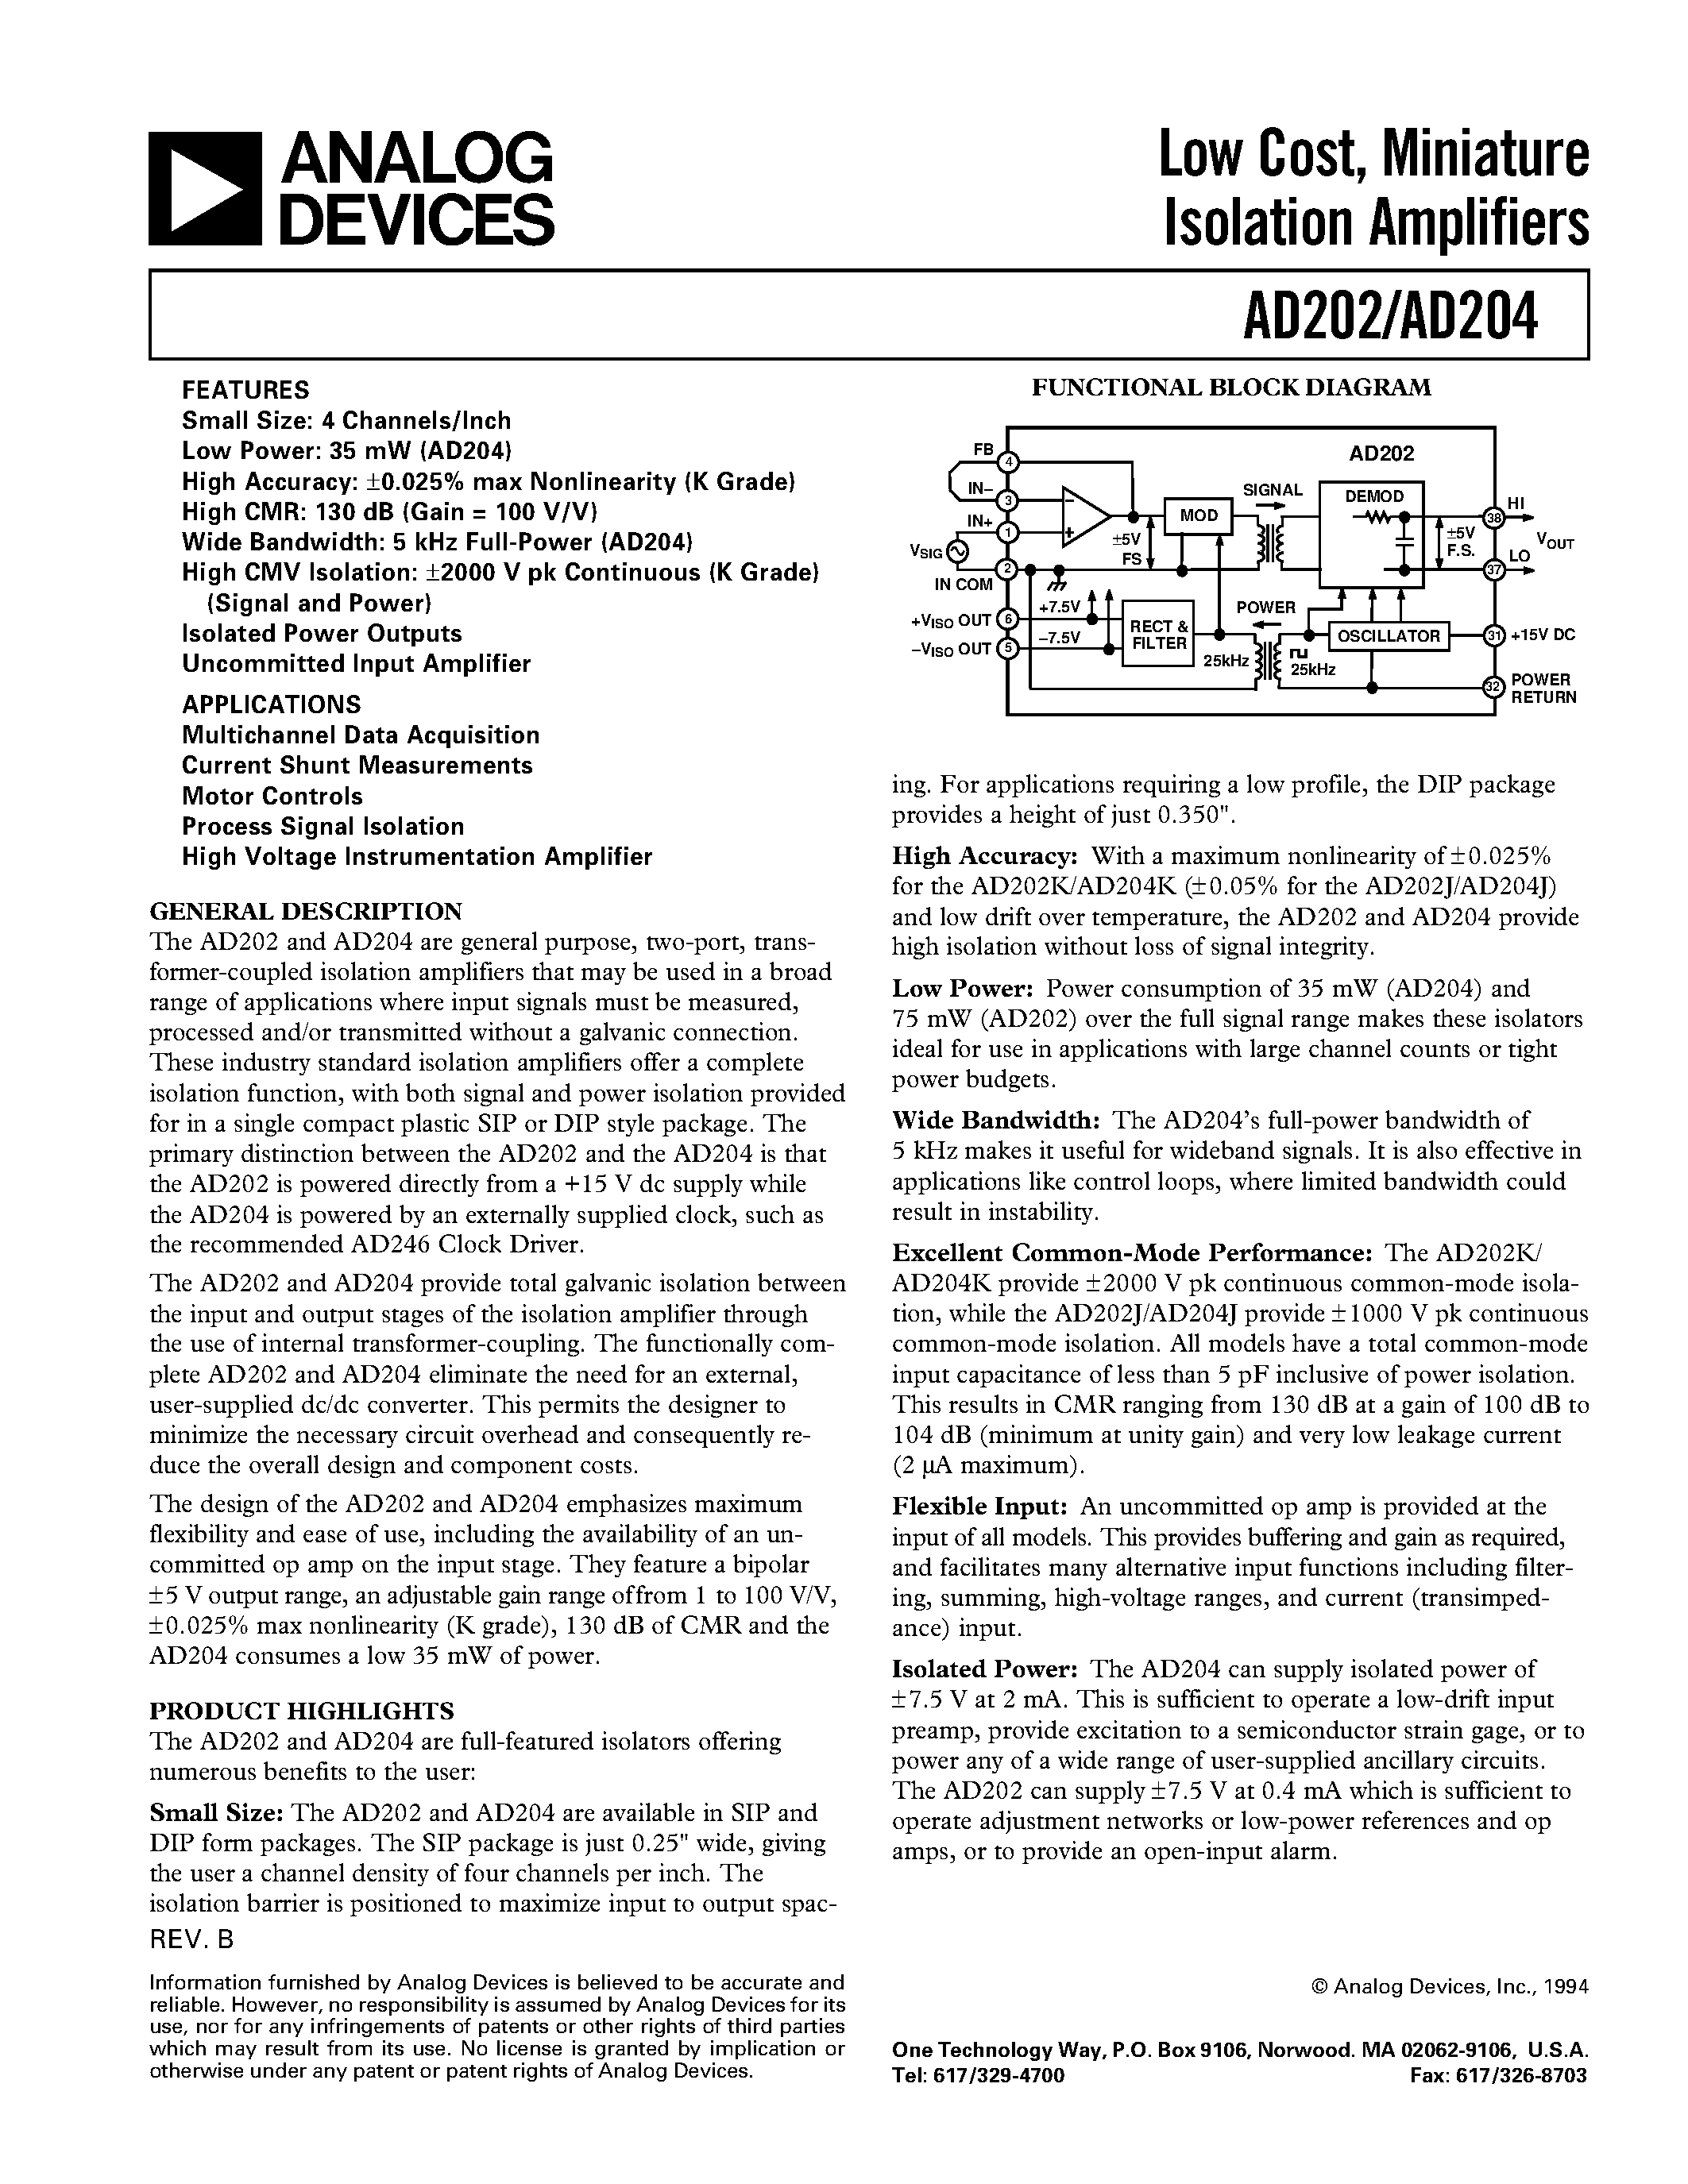 Datasheet AD204 - Low Cost/ Miniature Isolation Amplifiers page 1